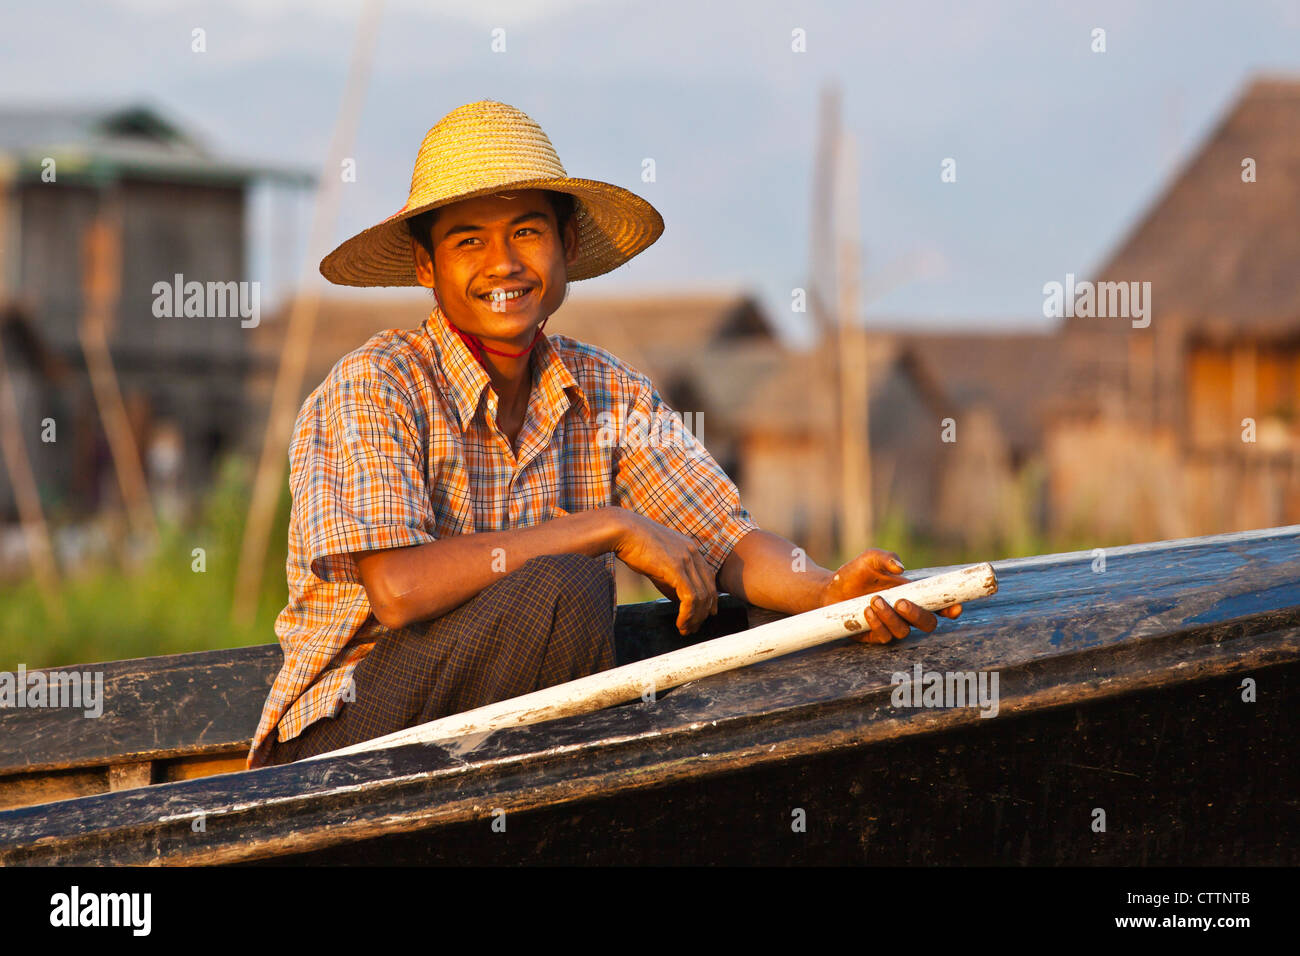 Hand made WOODEN BOATS are the main form of transportation on INLE LAKE - MYANMAR Stock Photo